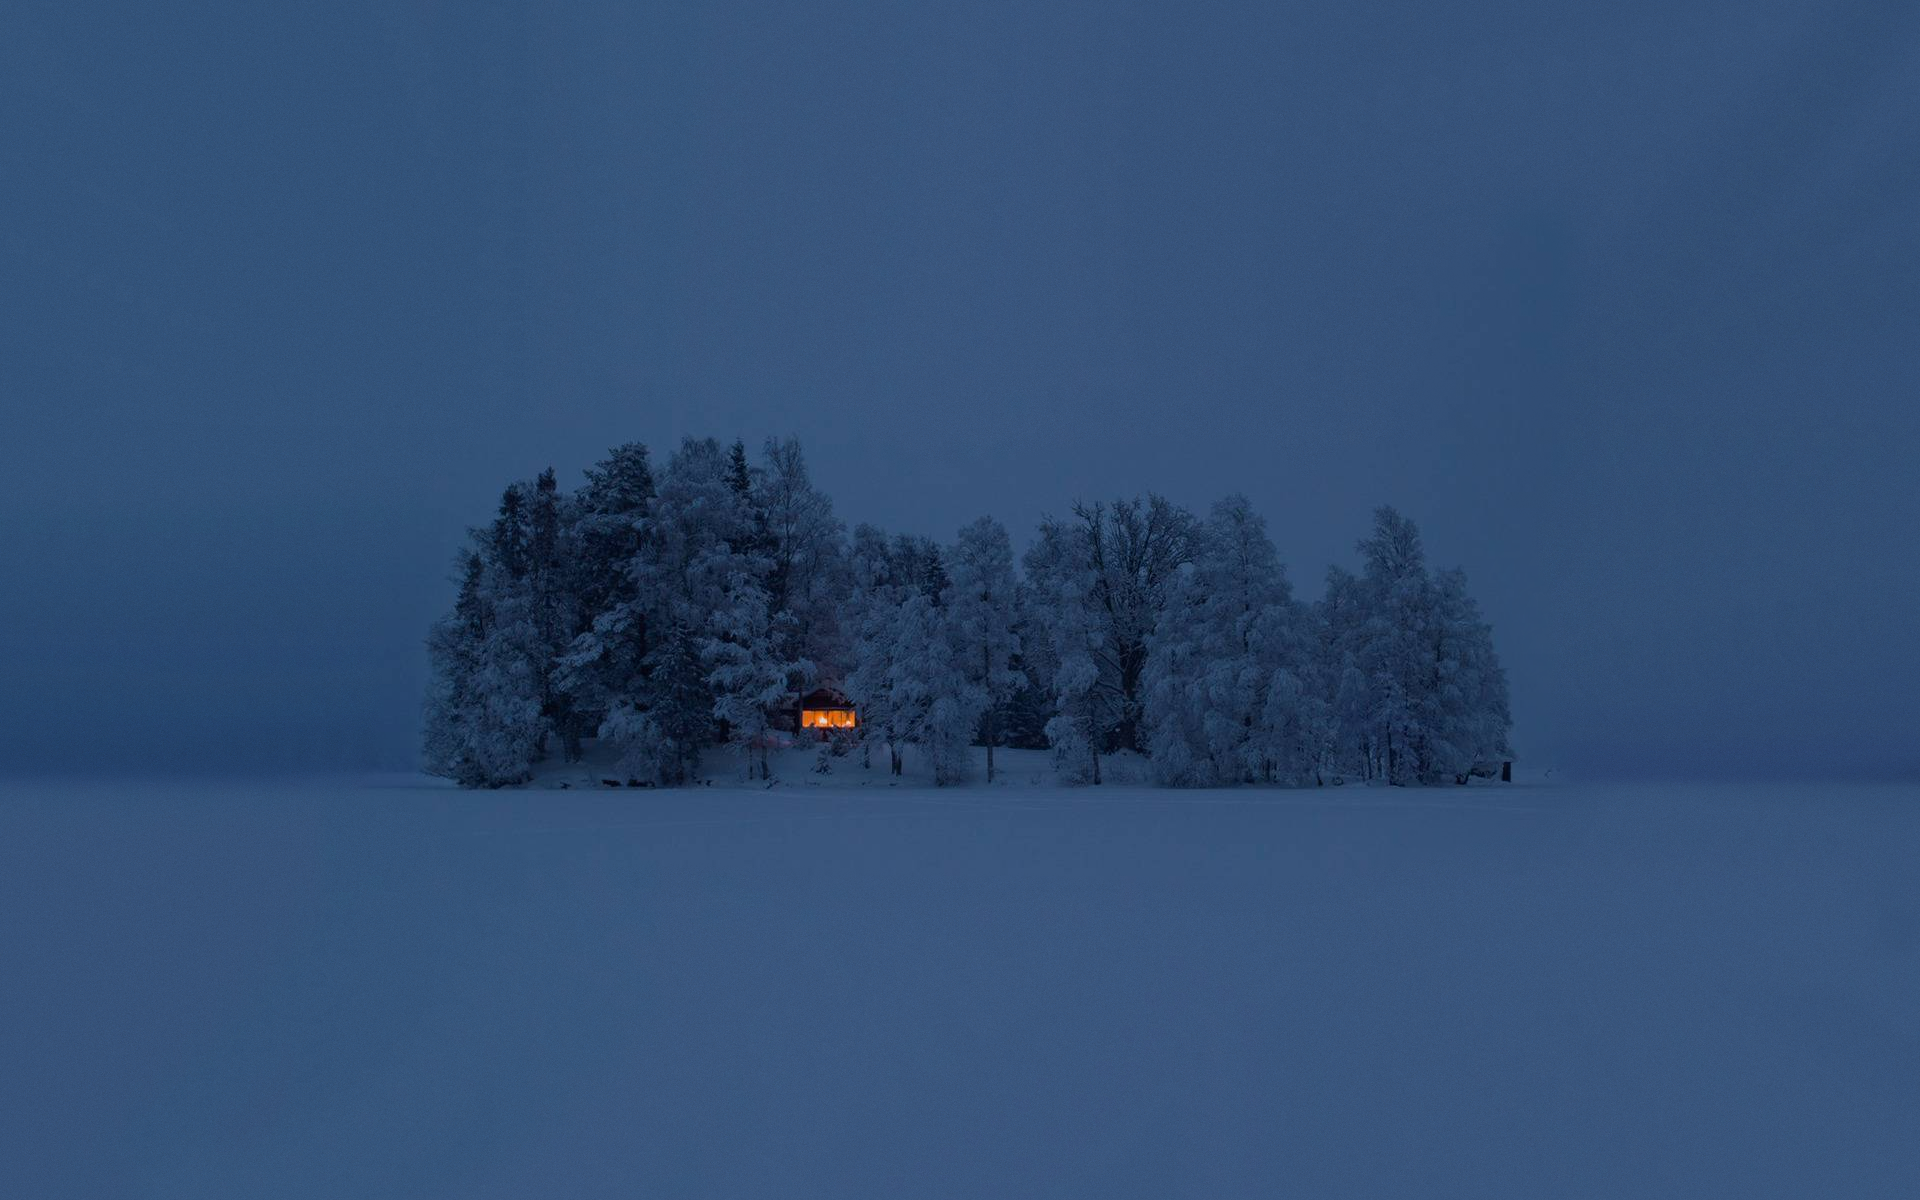 General 1920x1200 landscape snow house winter atmosphere blue island lake cold outdoors lights